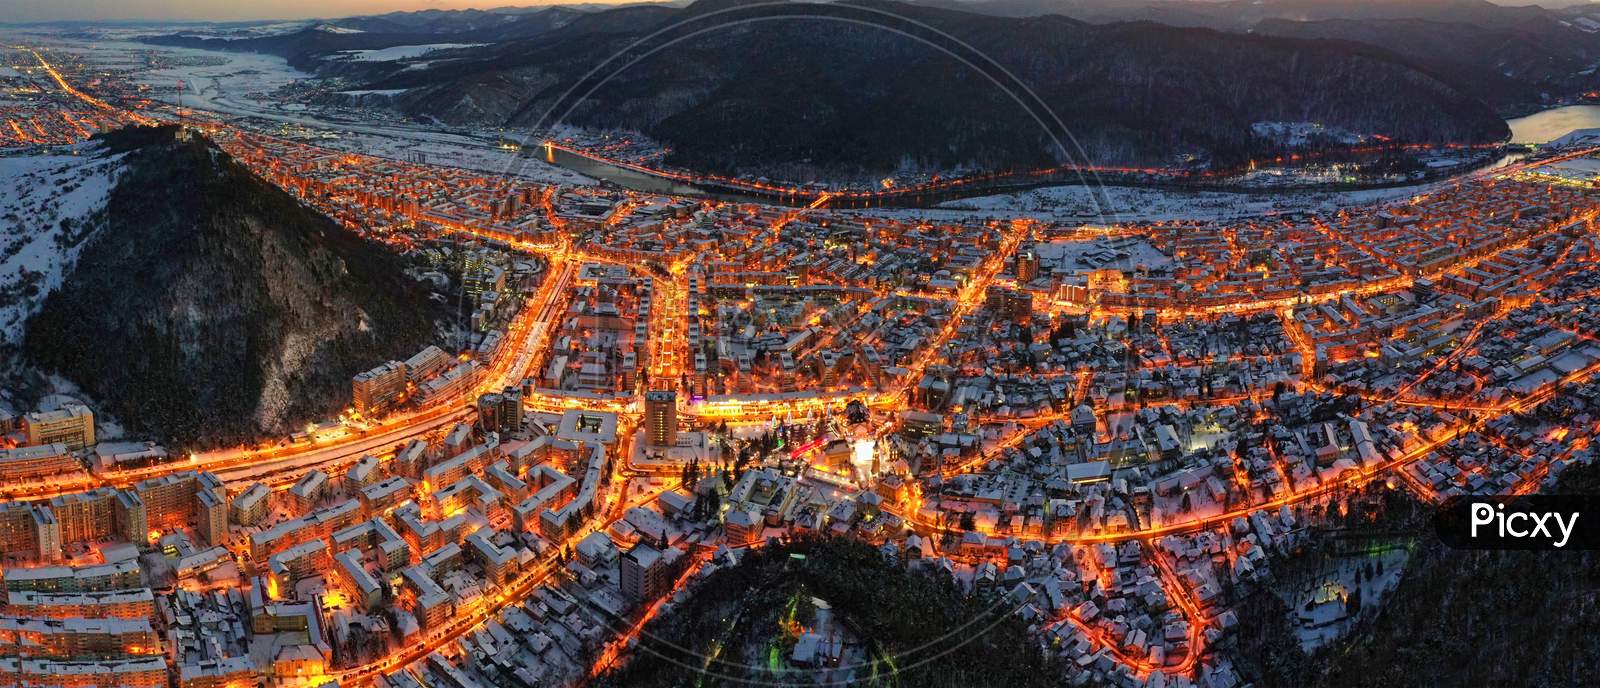 Aerial View Of City Lights In Winter Evening.